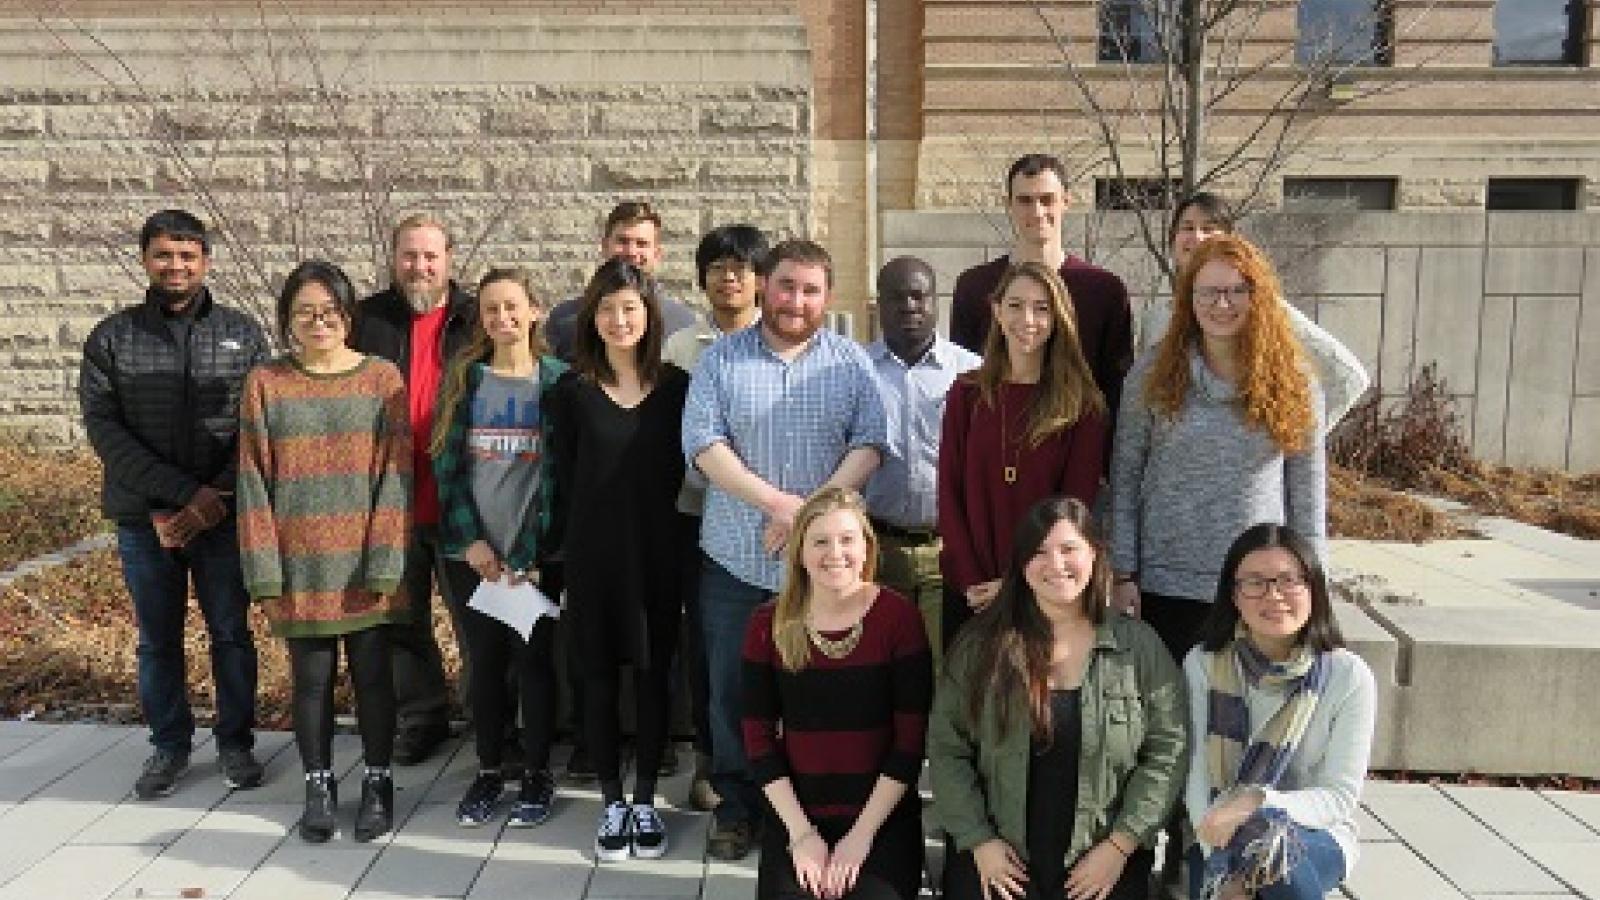 Members of the CCBBI Student Group gather for a photo after their Users Workshop.